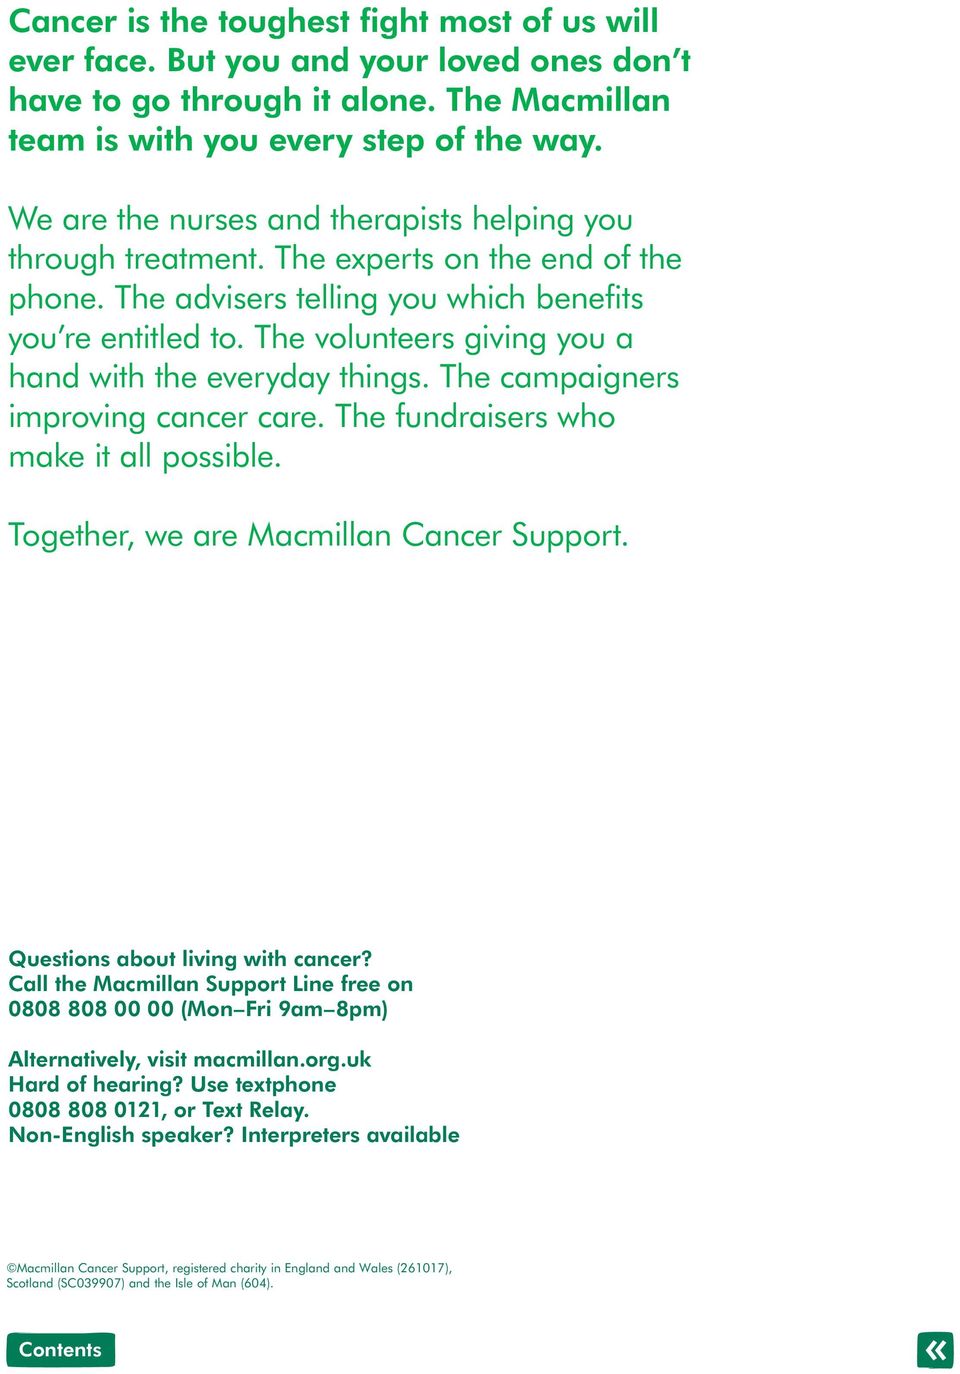 The volunteers giving you a hand with the everyday things. The campaigners improving cancer care. The fundraisers who make it all possible. Together, we are Macmillan Cancer Support.